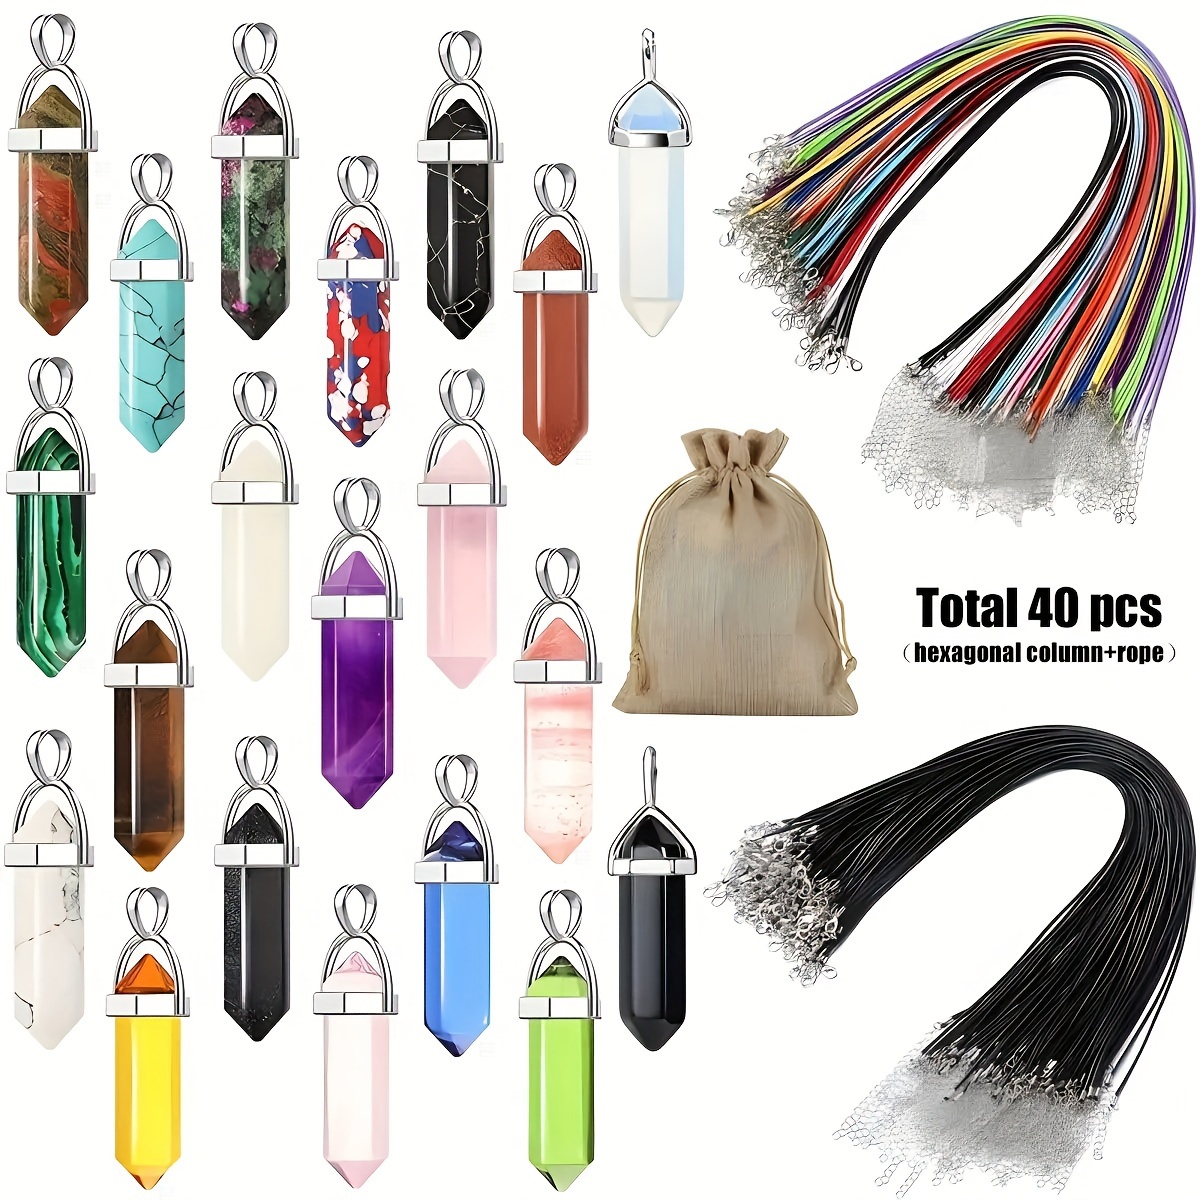 

40pc/30pc Set - Natural Quartz Crystal Points With Leather Necklaces & Storage Bag - Perfect For Diy Energy Healing Jewelry